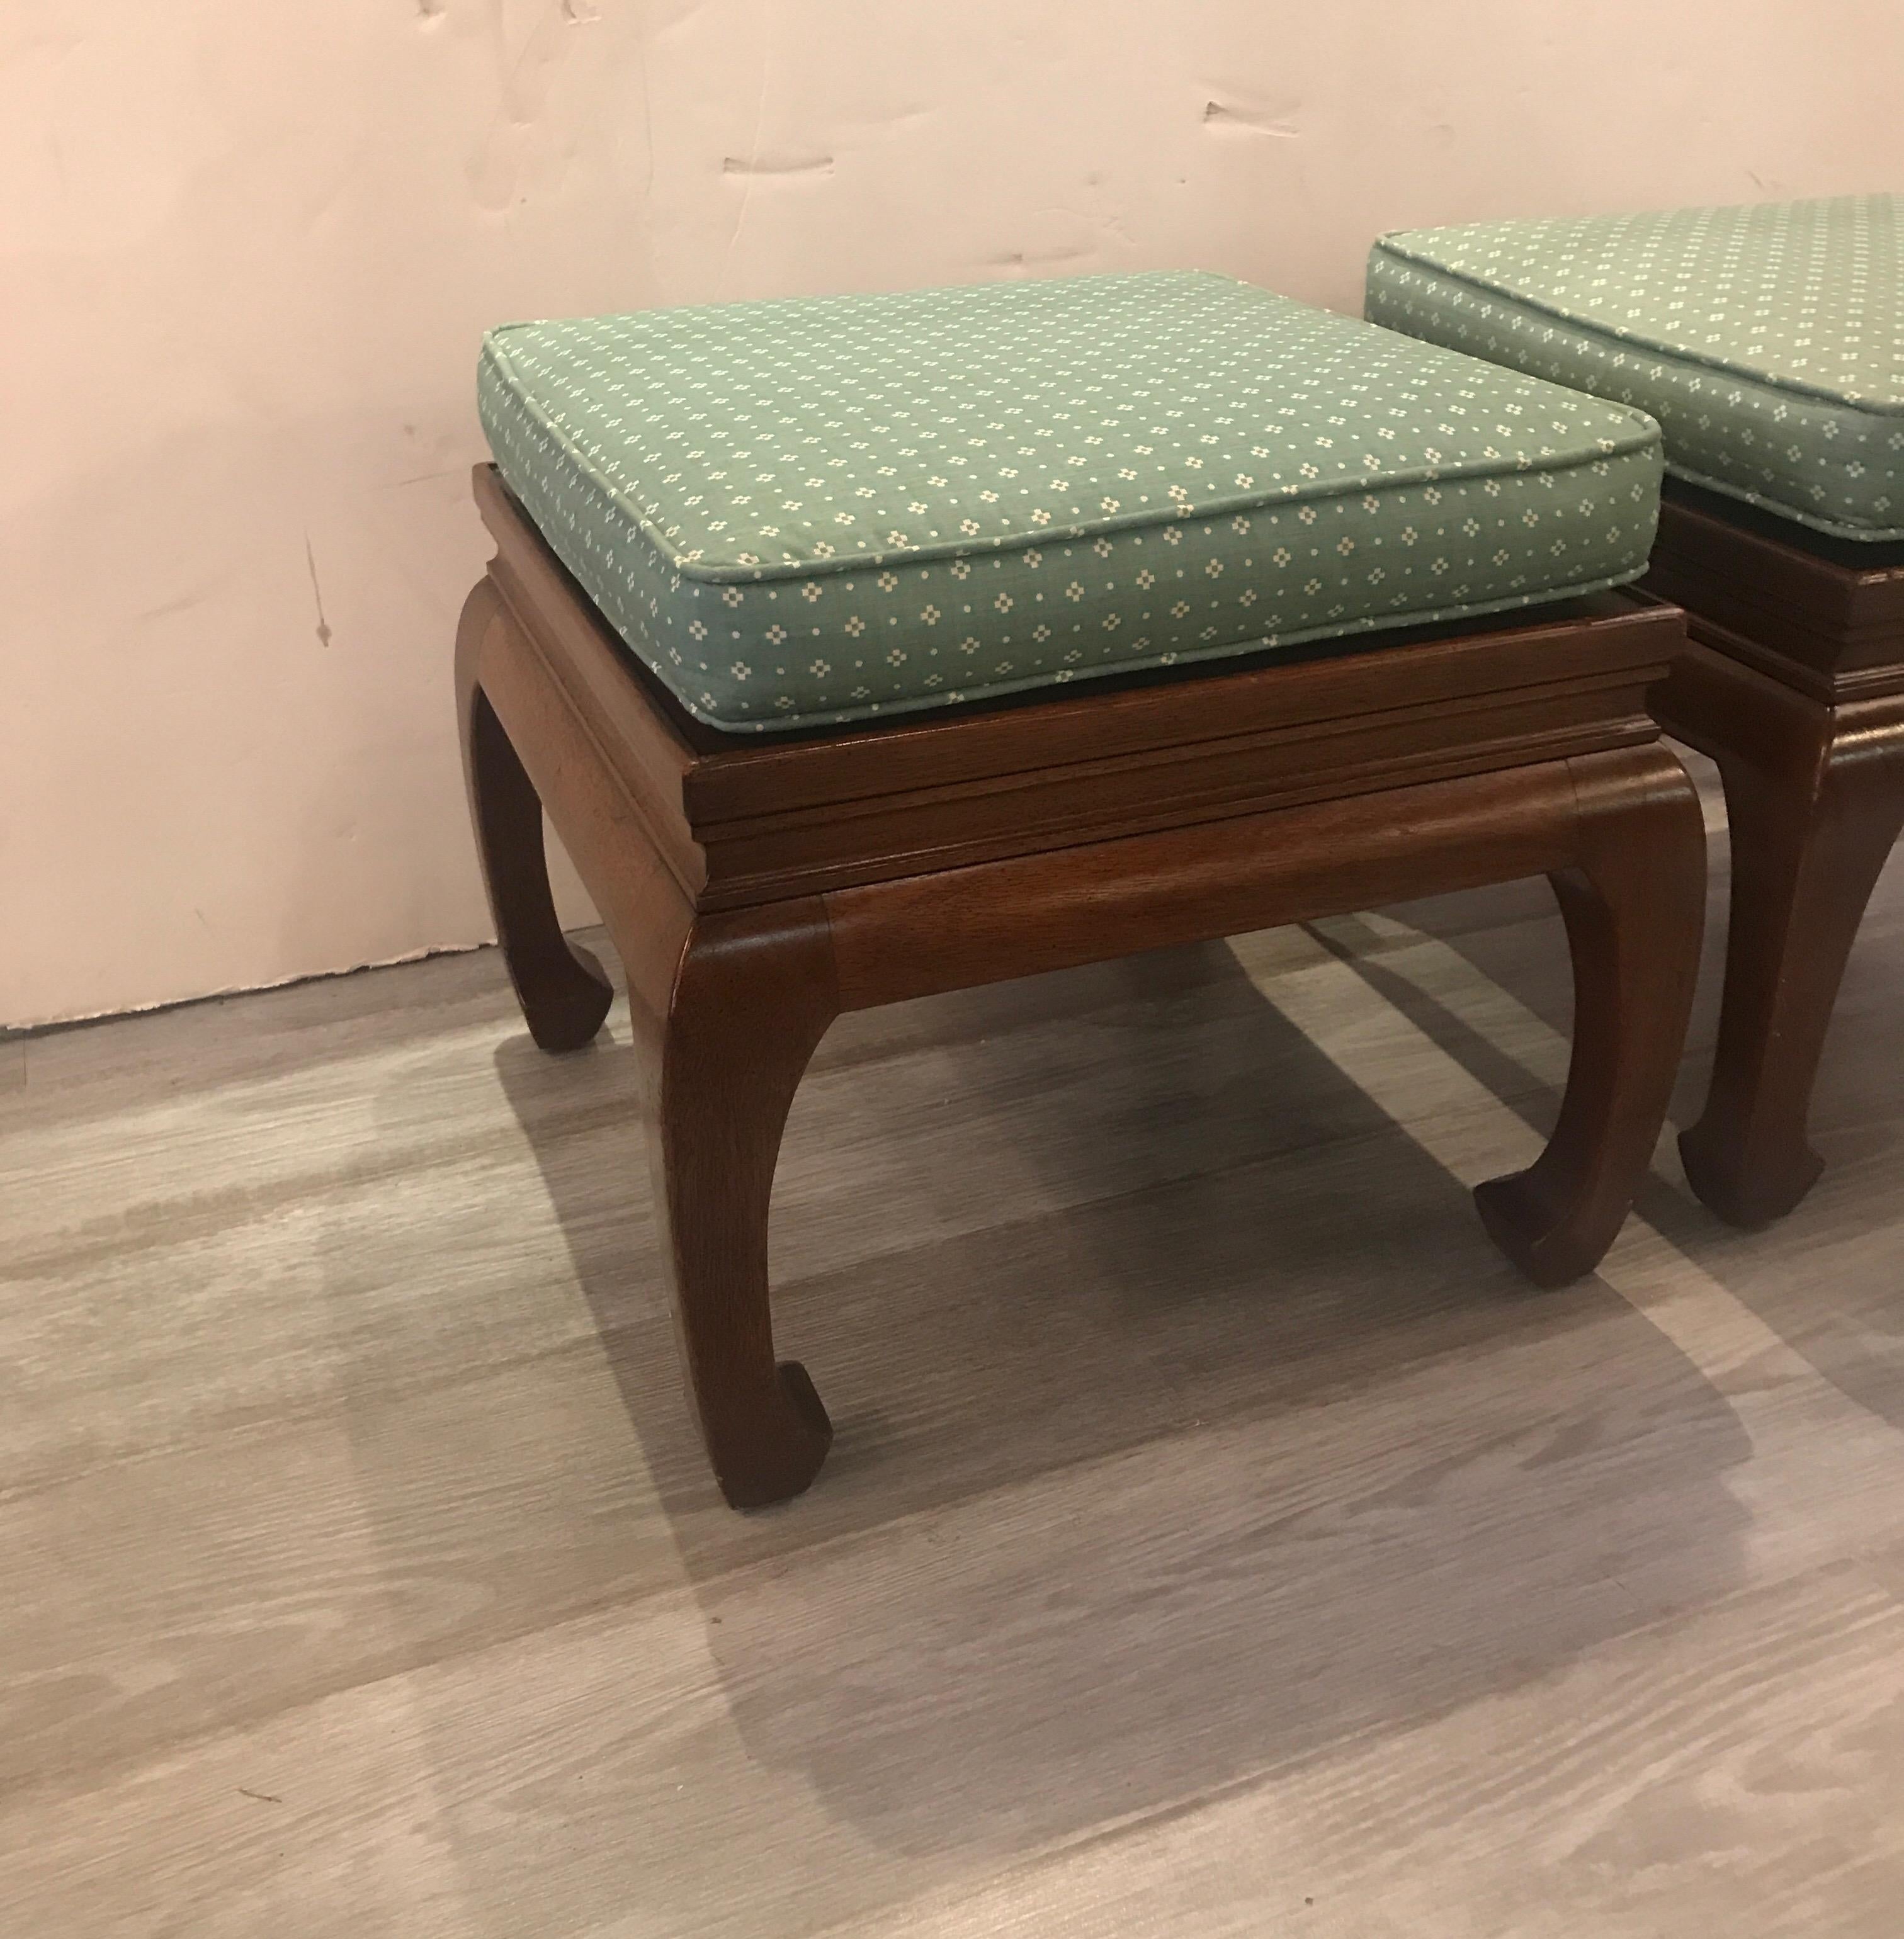 Pair of Asian Style Benches or Stands (amerikanisch)